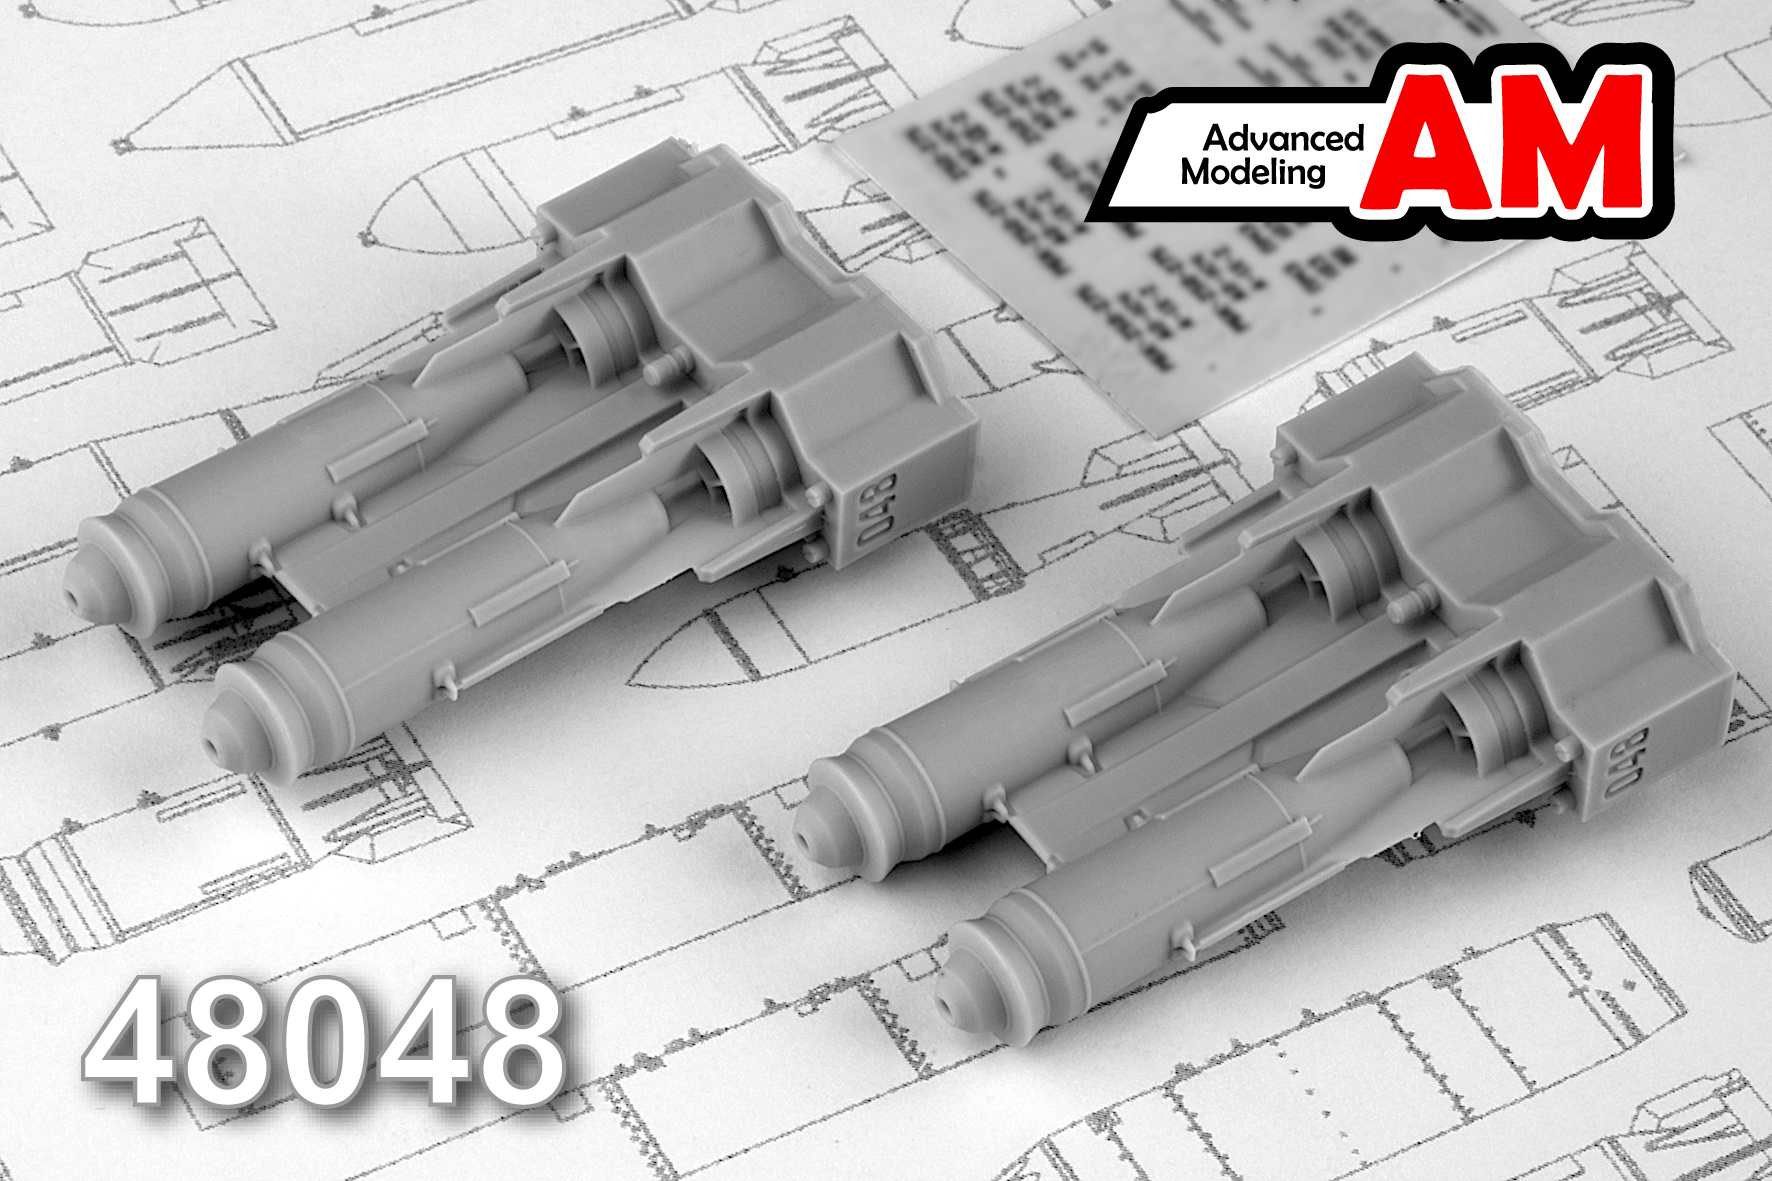 Additions (3D resin printing) 1/48 FAB-250 M-54 High-Explosive 250 kg bomb (Advanced Modeling) 